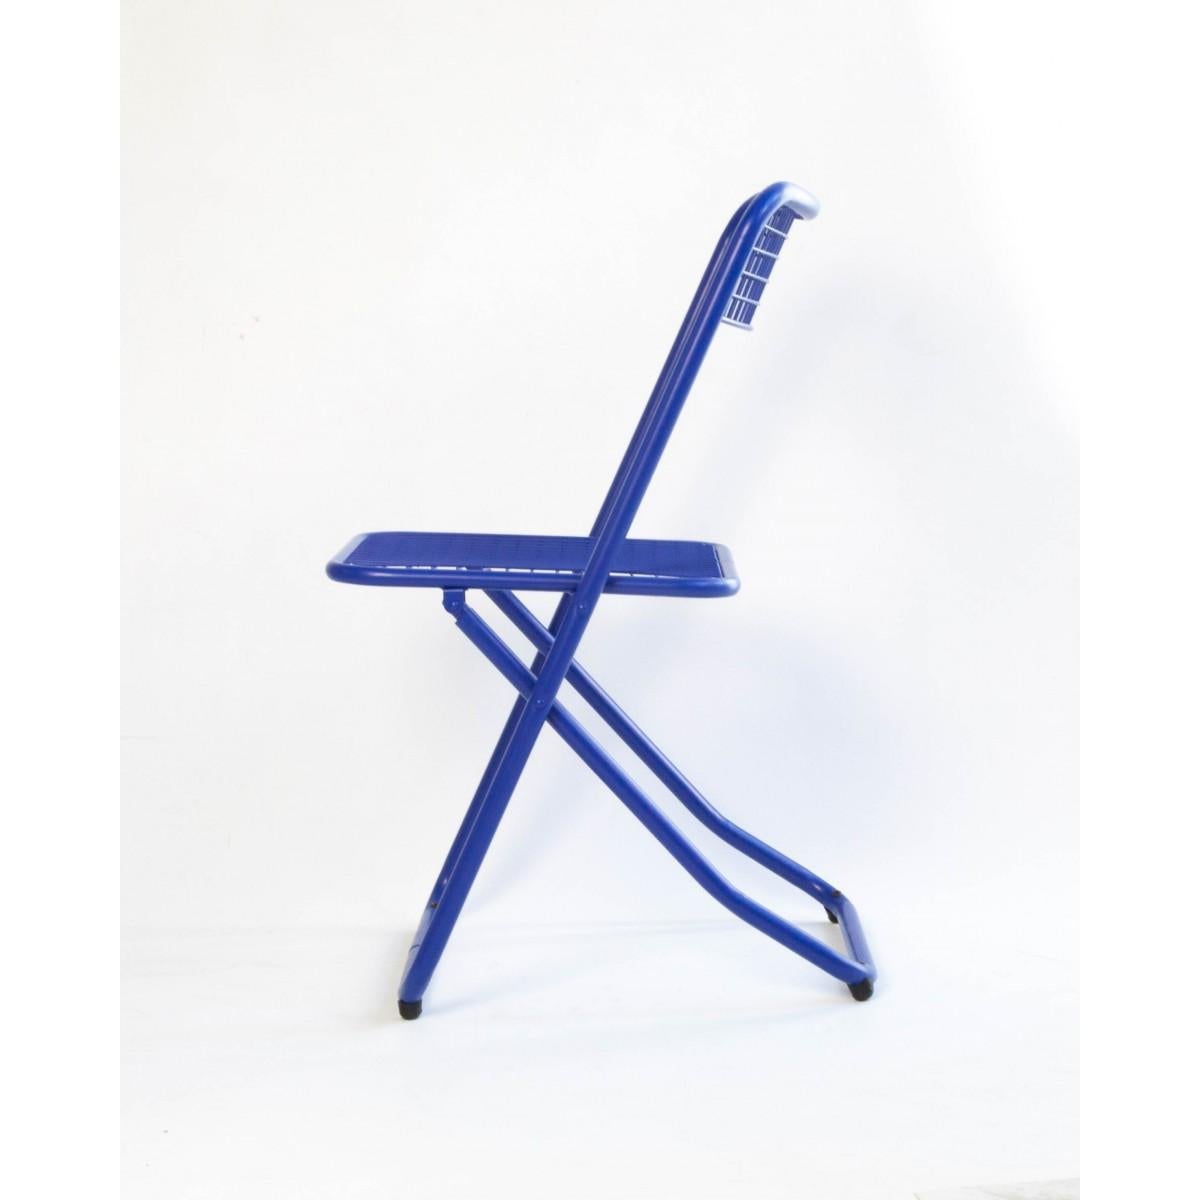 Modern New Folding Iron Chair Blue 5002 by Houtique 